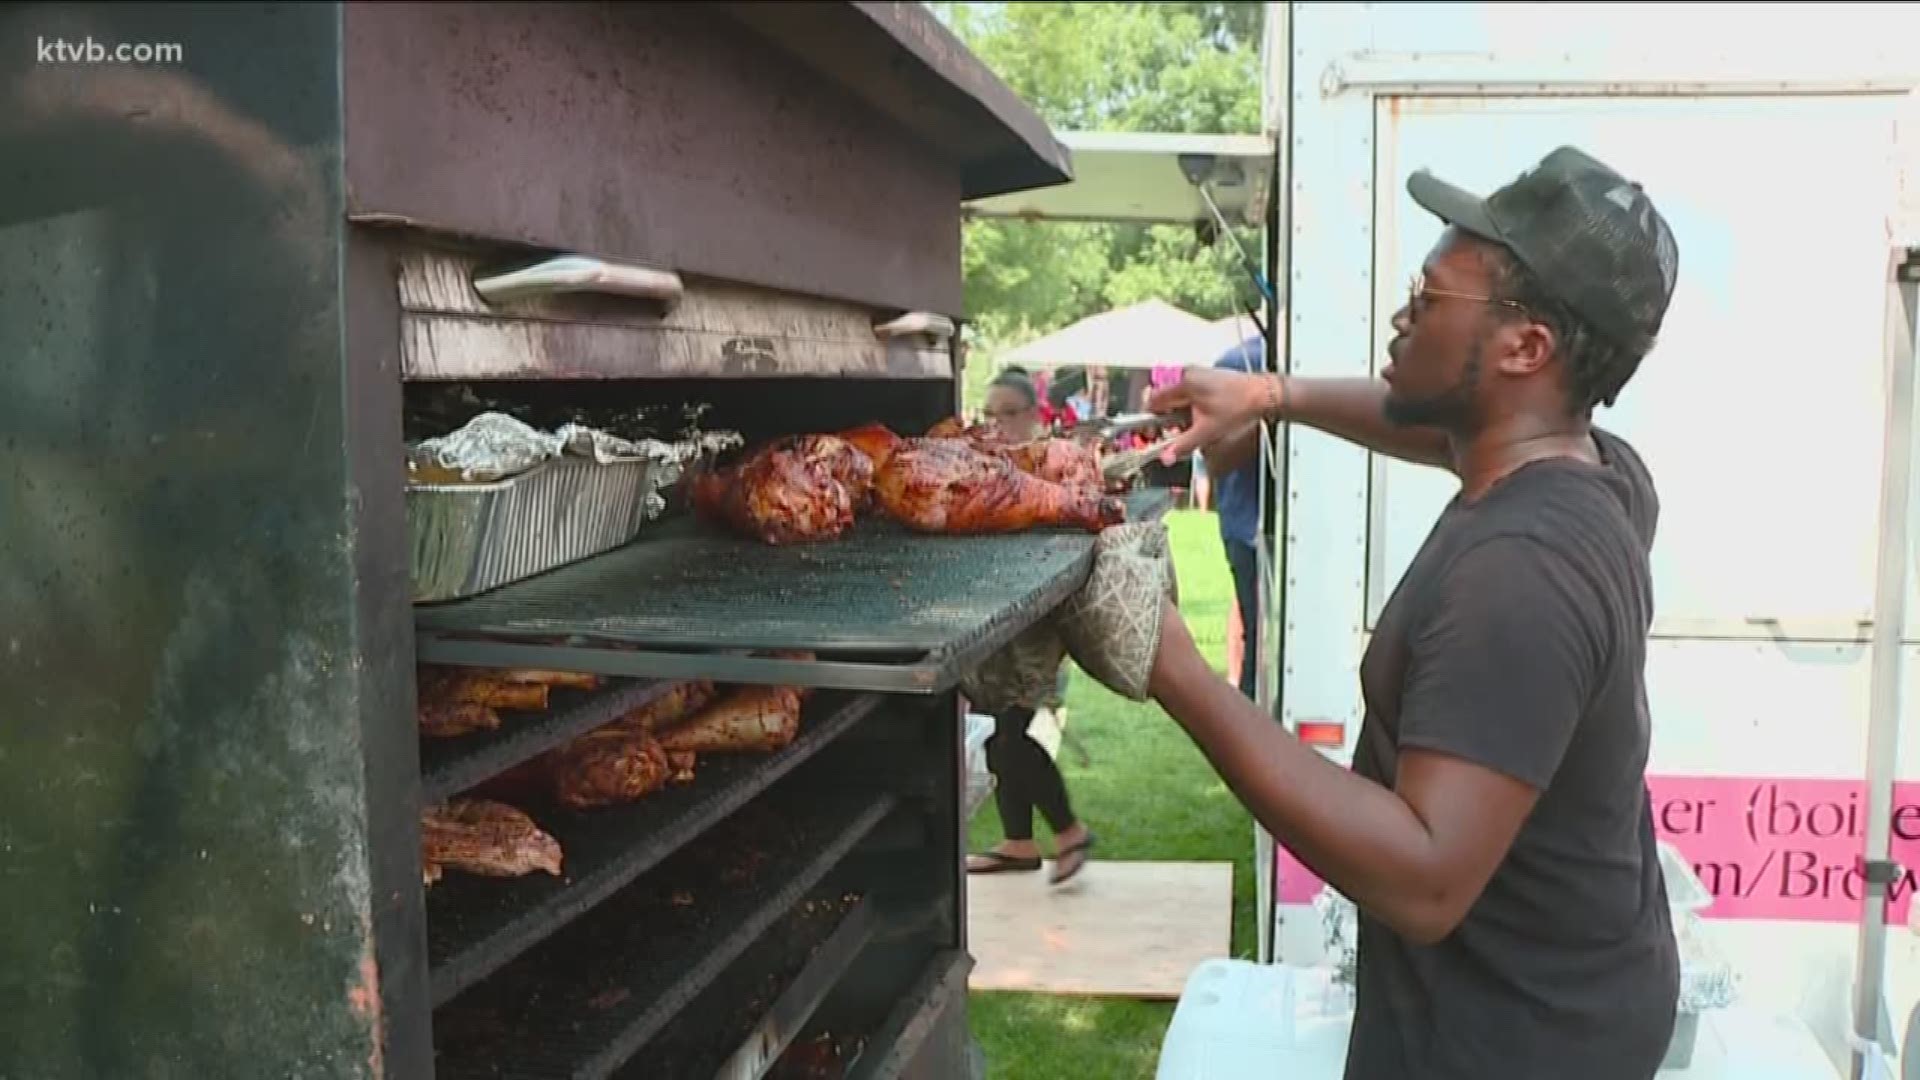 The Soul Food Festival took place Saturday at Eagle Island State Park.